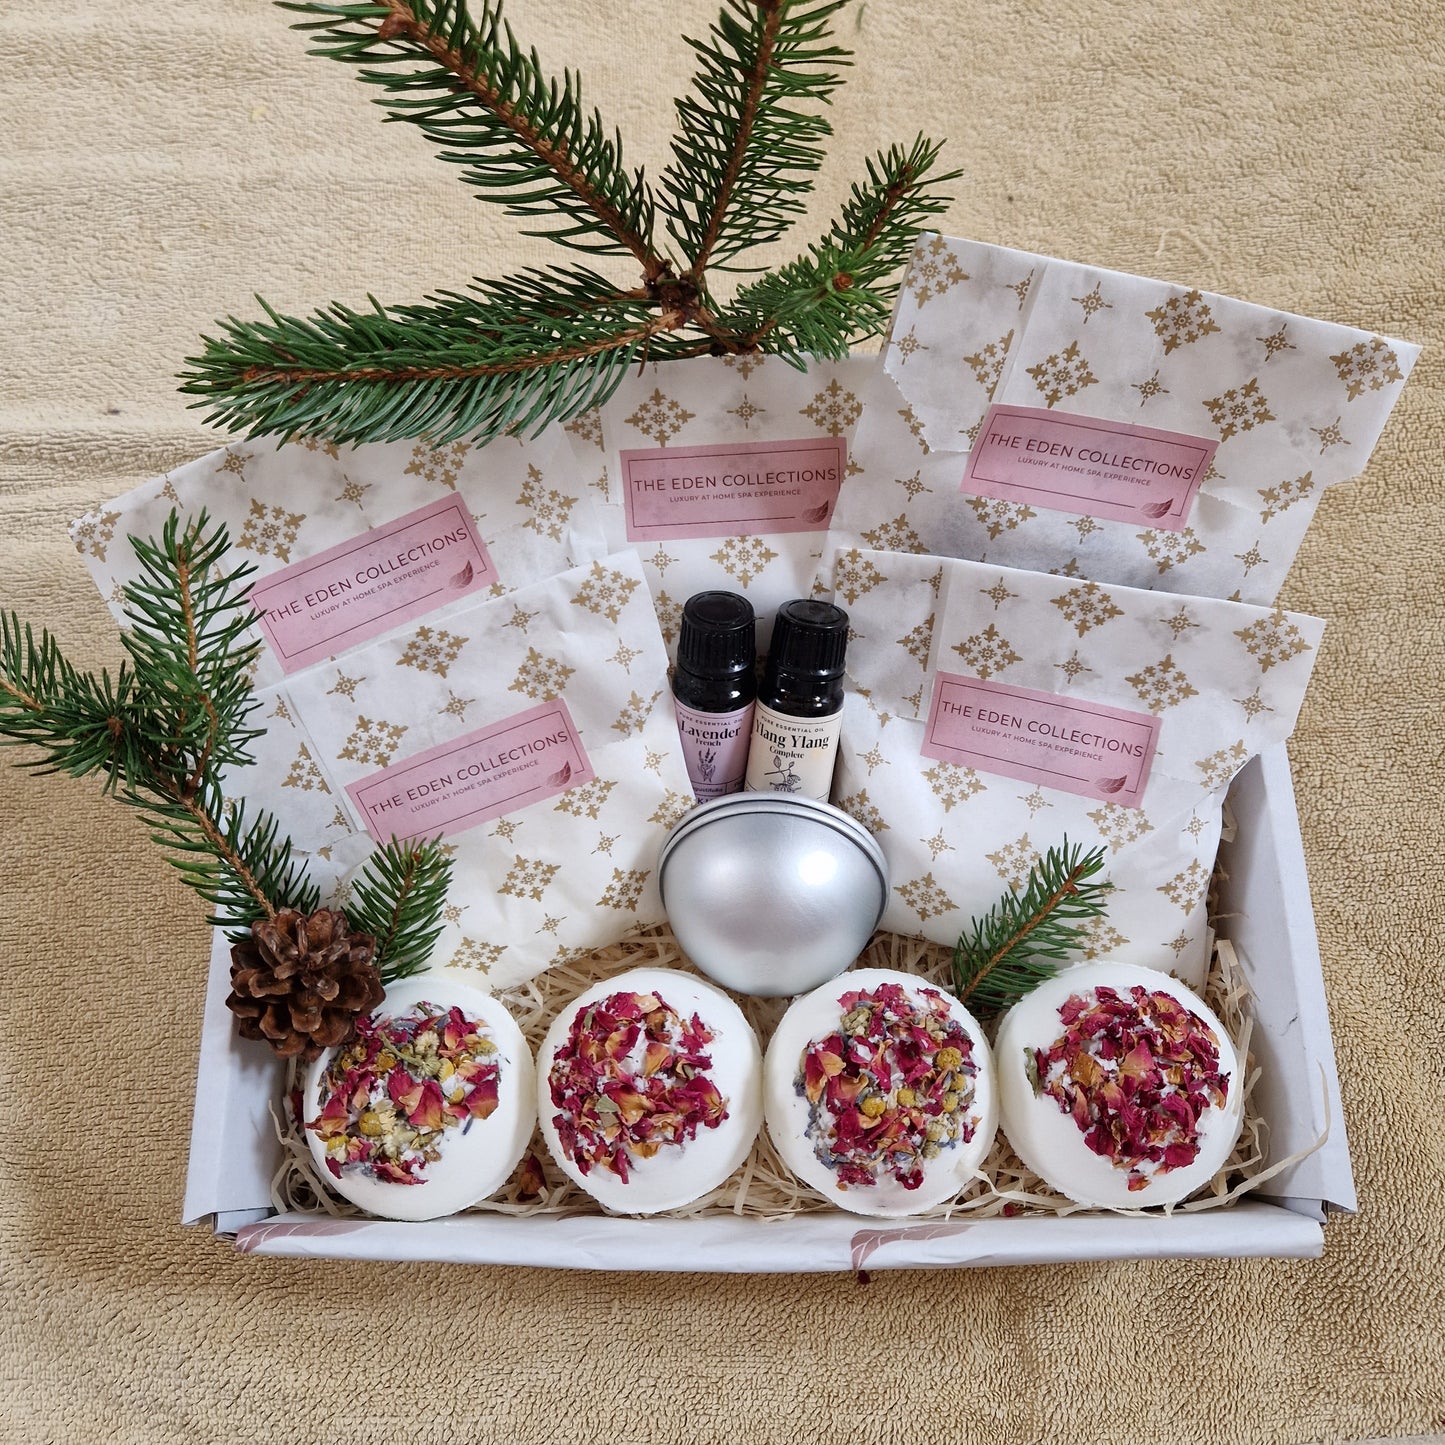 DIY, all natural, vegan, luxurious, plastic free Bath Bomb Making Kit by The Eden Collections.